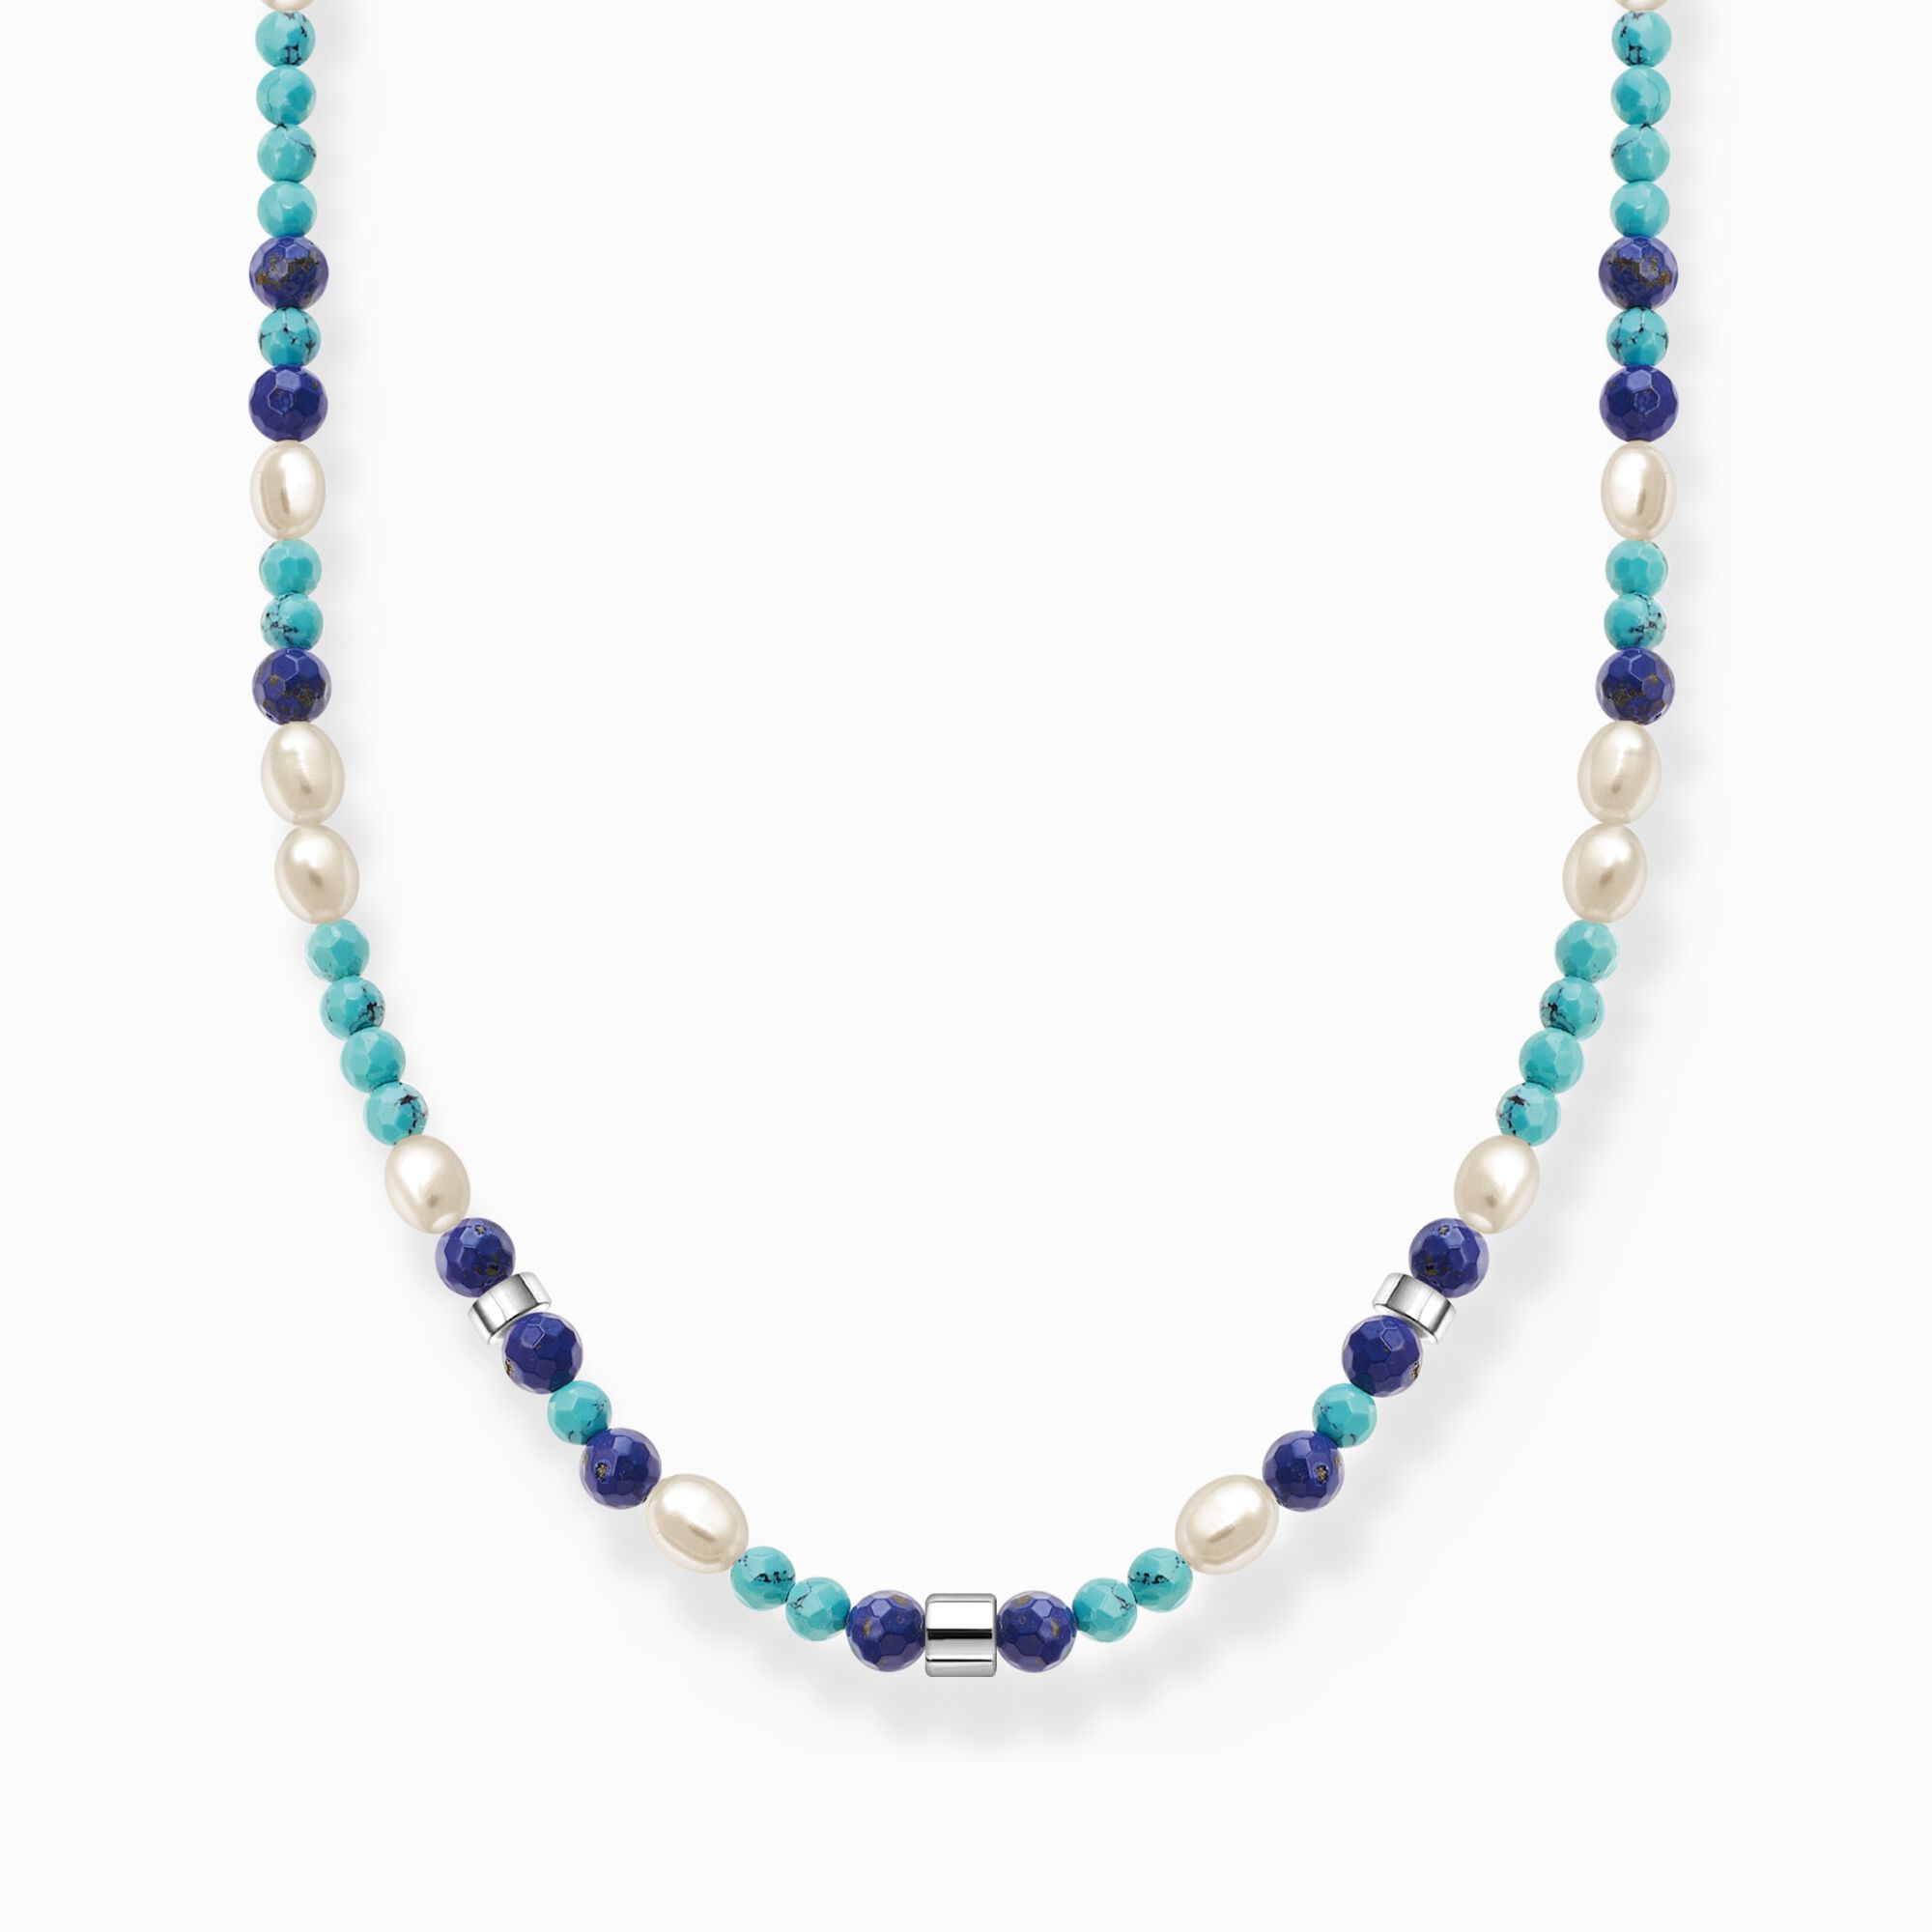 Necklace with blue stones and pearls from the Charming Collection collection in the THOMAS SABO online store